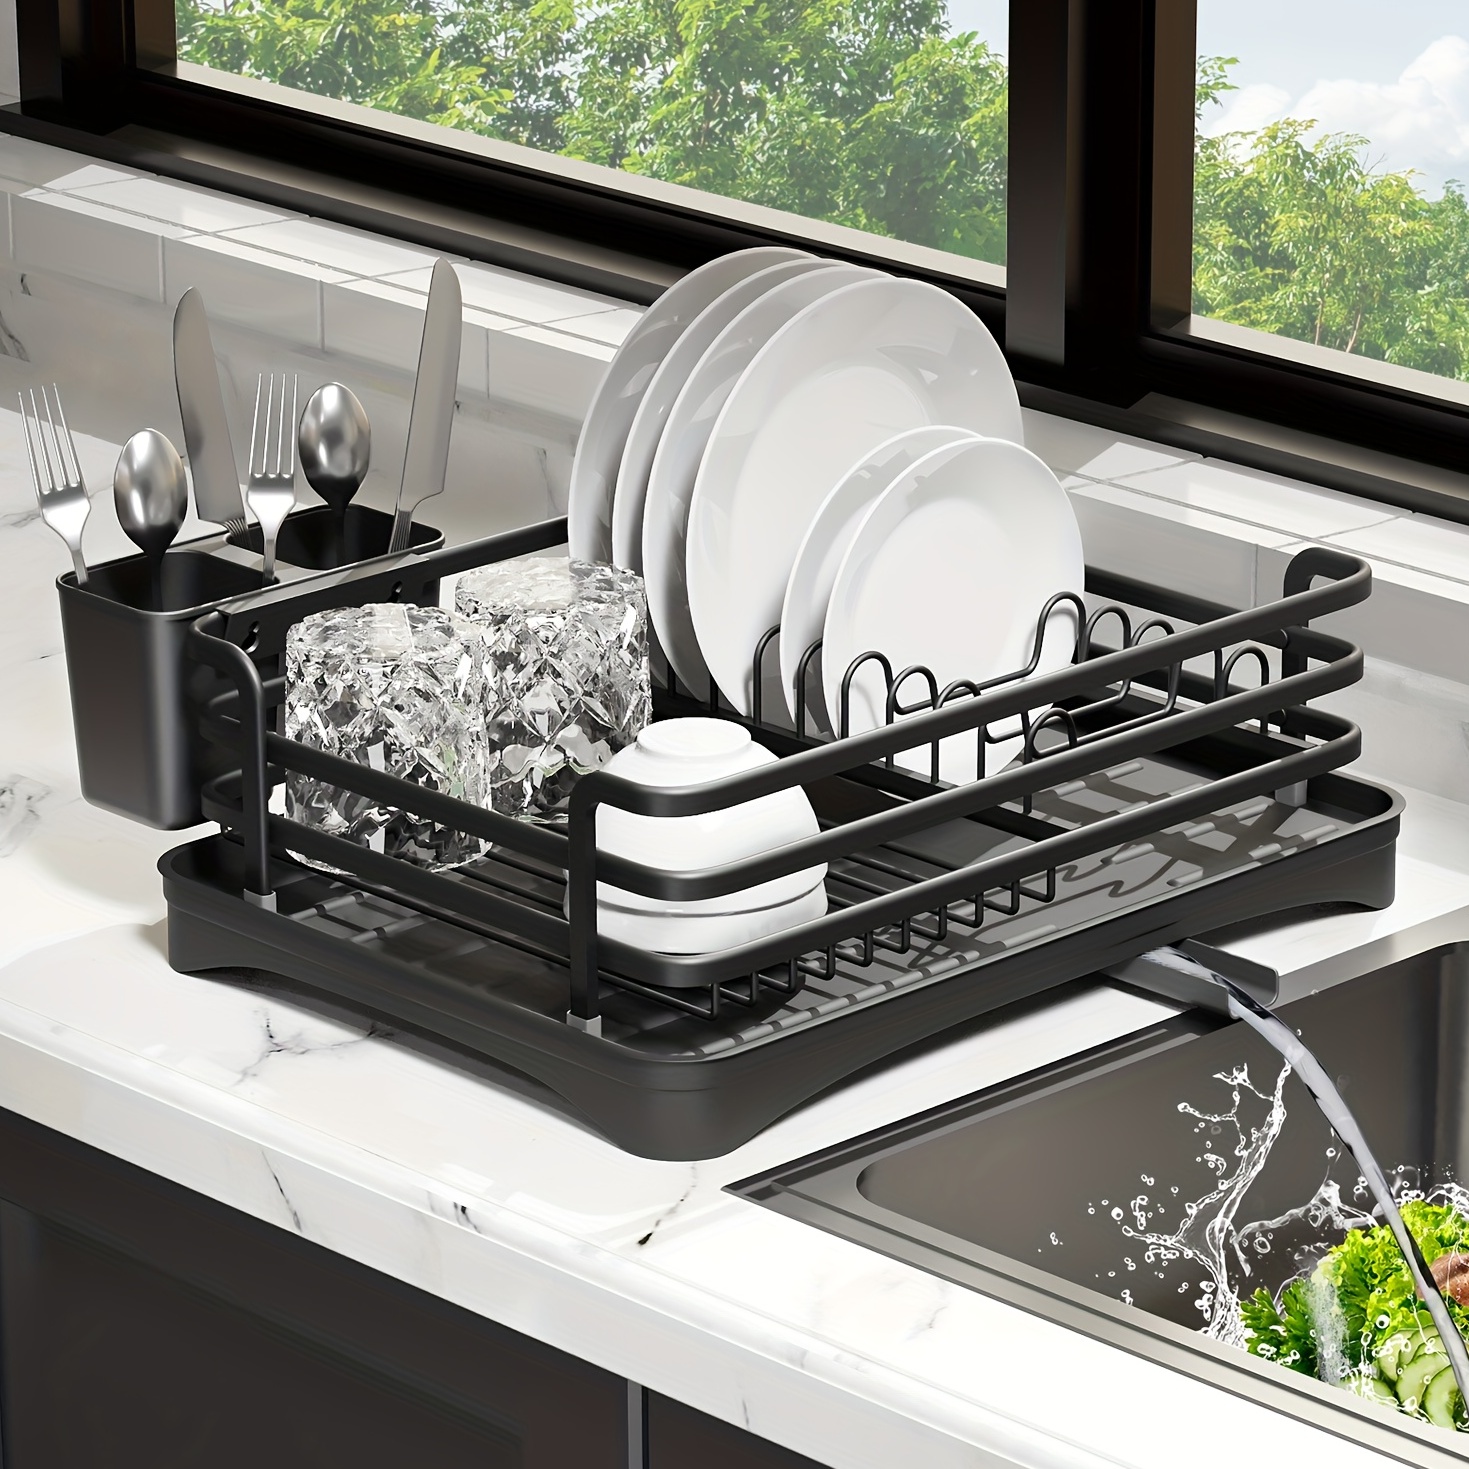 Space Saving Dish Drying Rack for Kitchen Counter, Durable Drying Rack with  a Cutlery Holder for Dishes, Knives, Spoons, Forks - AliExpress